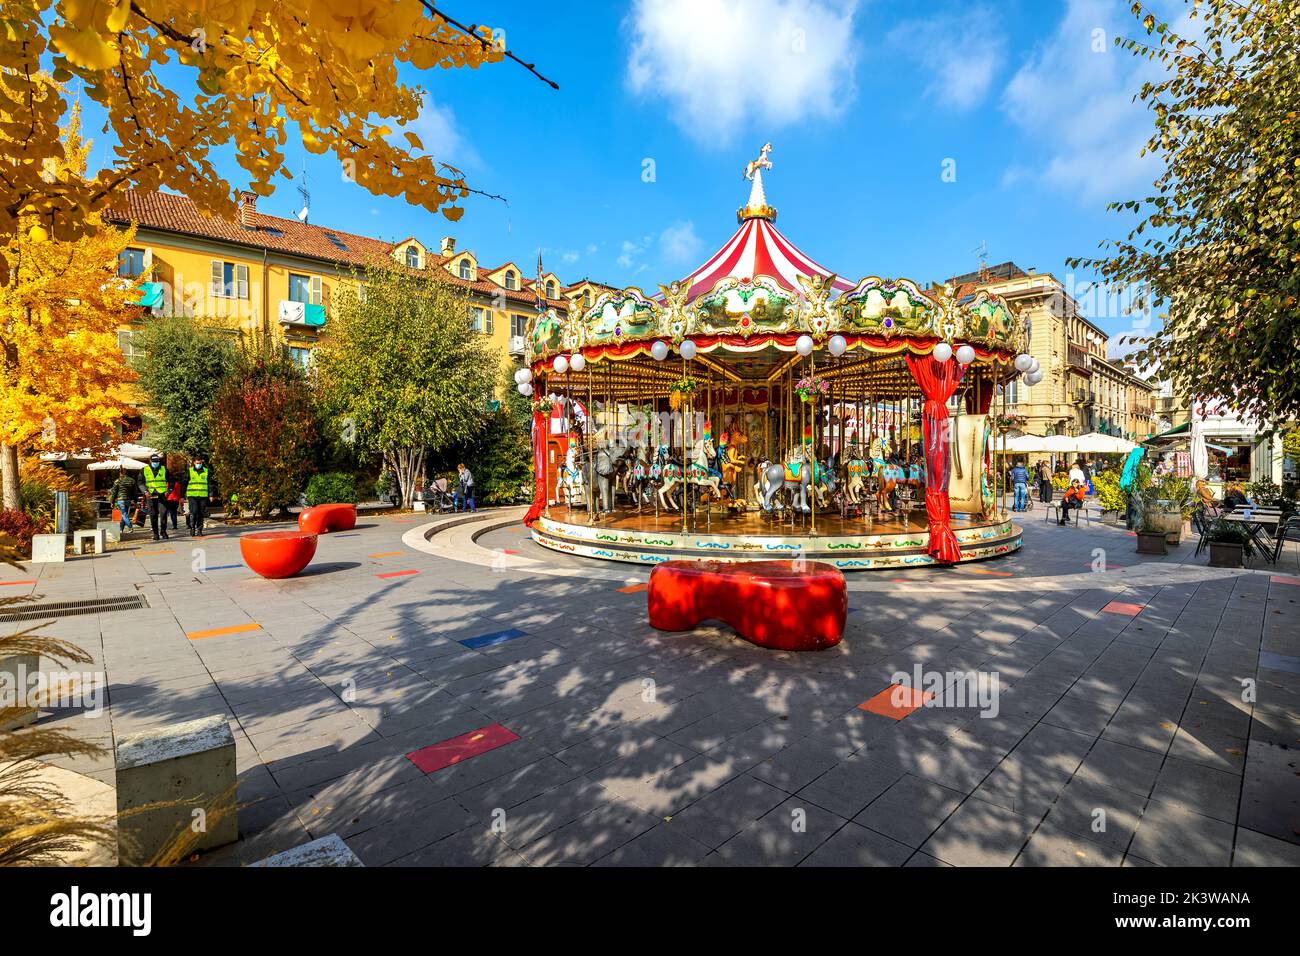 Carousel on the town square surrounded under blue sky in Alba - small town in Piedmont region in Northern Italy. Stock Photo